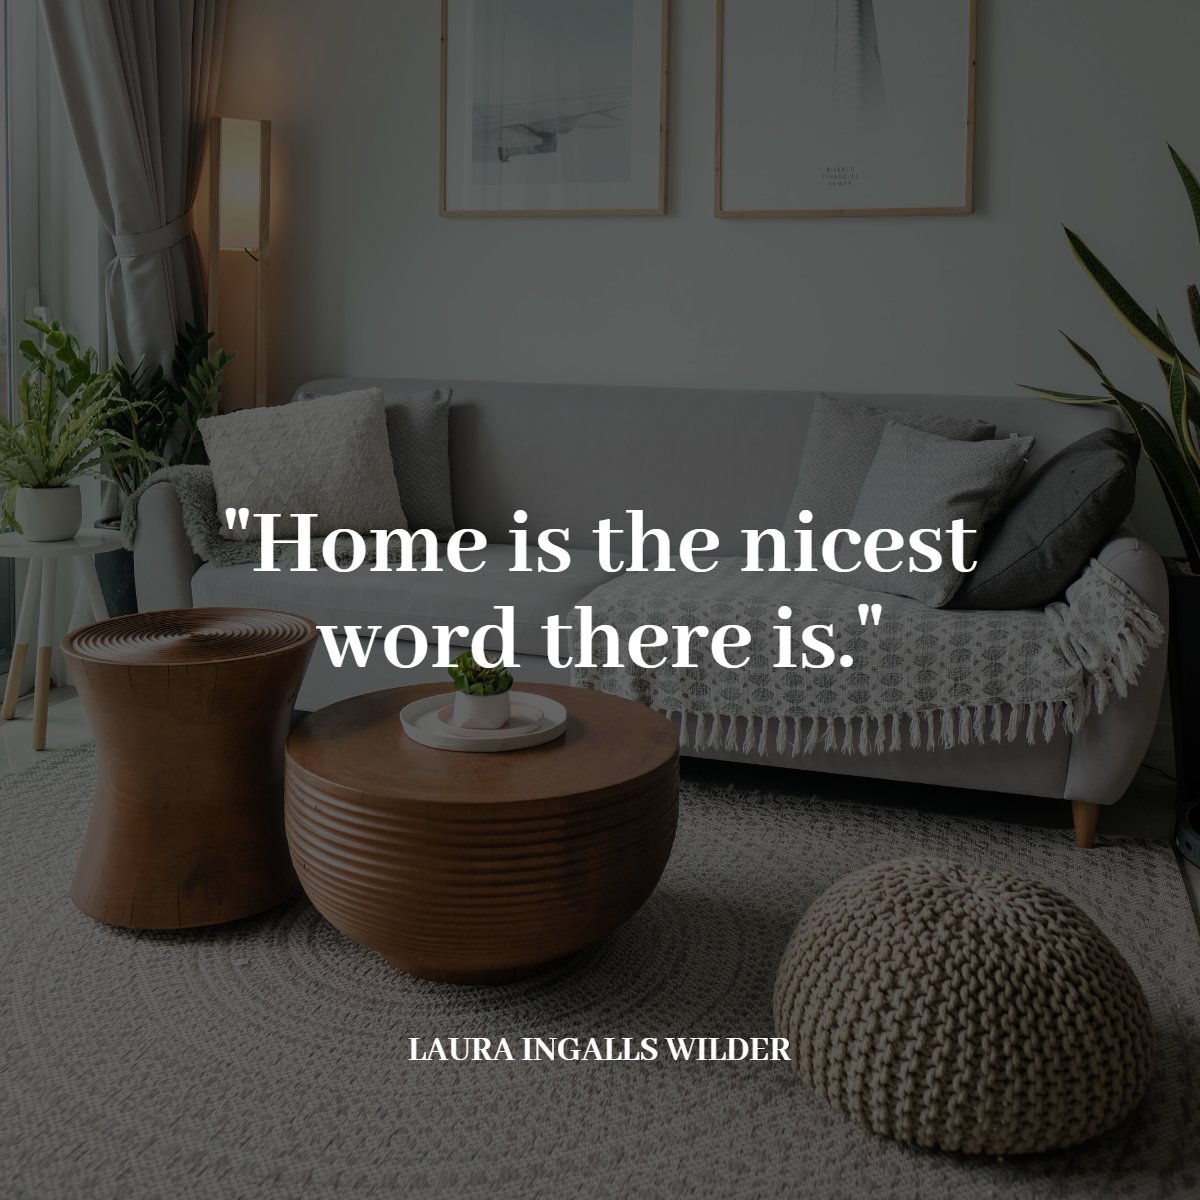 'Home is the nicest word there is.' 📖
― Laura Ingalls Wilder 

#home   #quote   #word   #family   #requotes   #quoteoftheday   #lauraingallswilder
#Realestate #fairlawn #paramus #saddlebrook #njrealestate #bergencounty #forsalebuyowner #propertymanagement